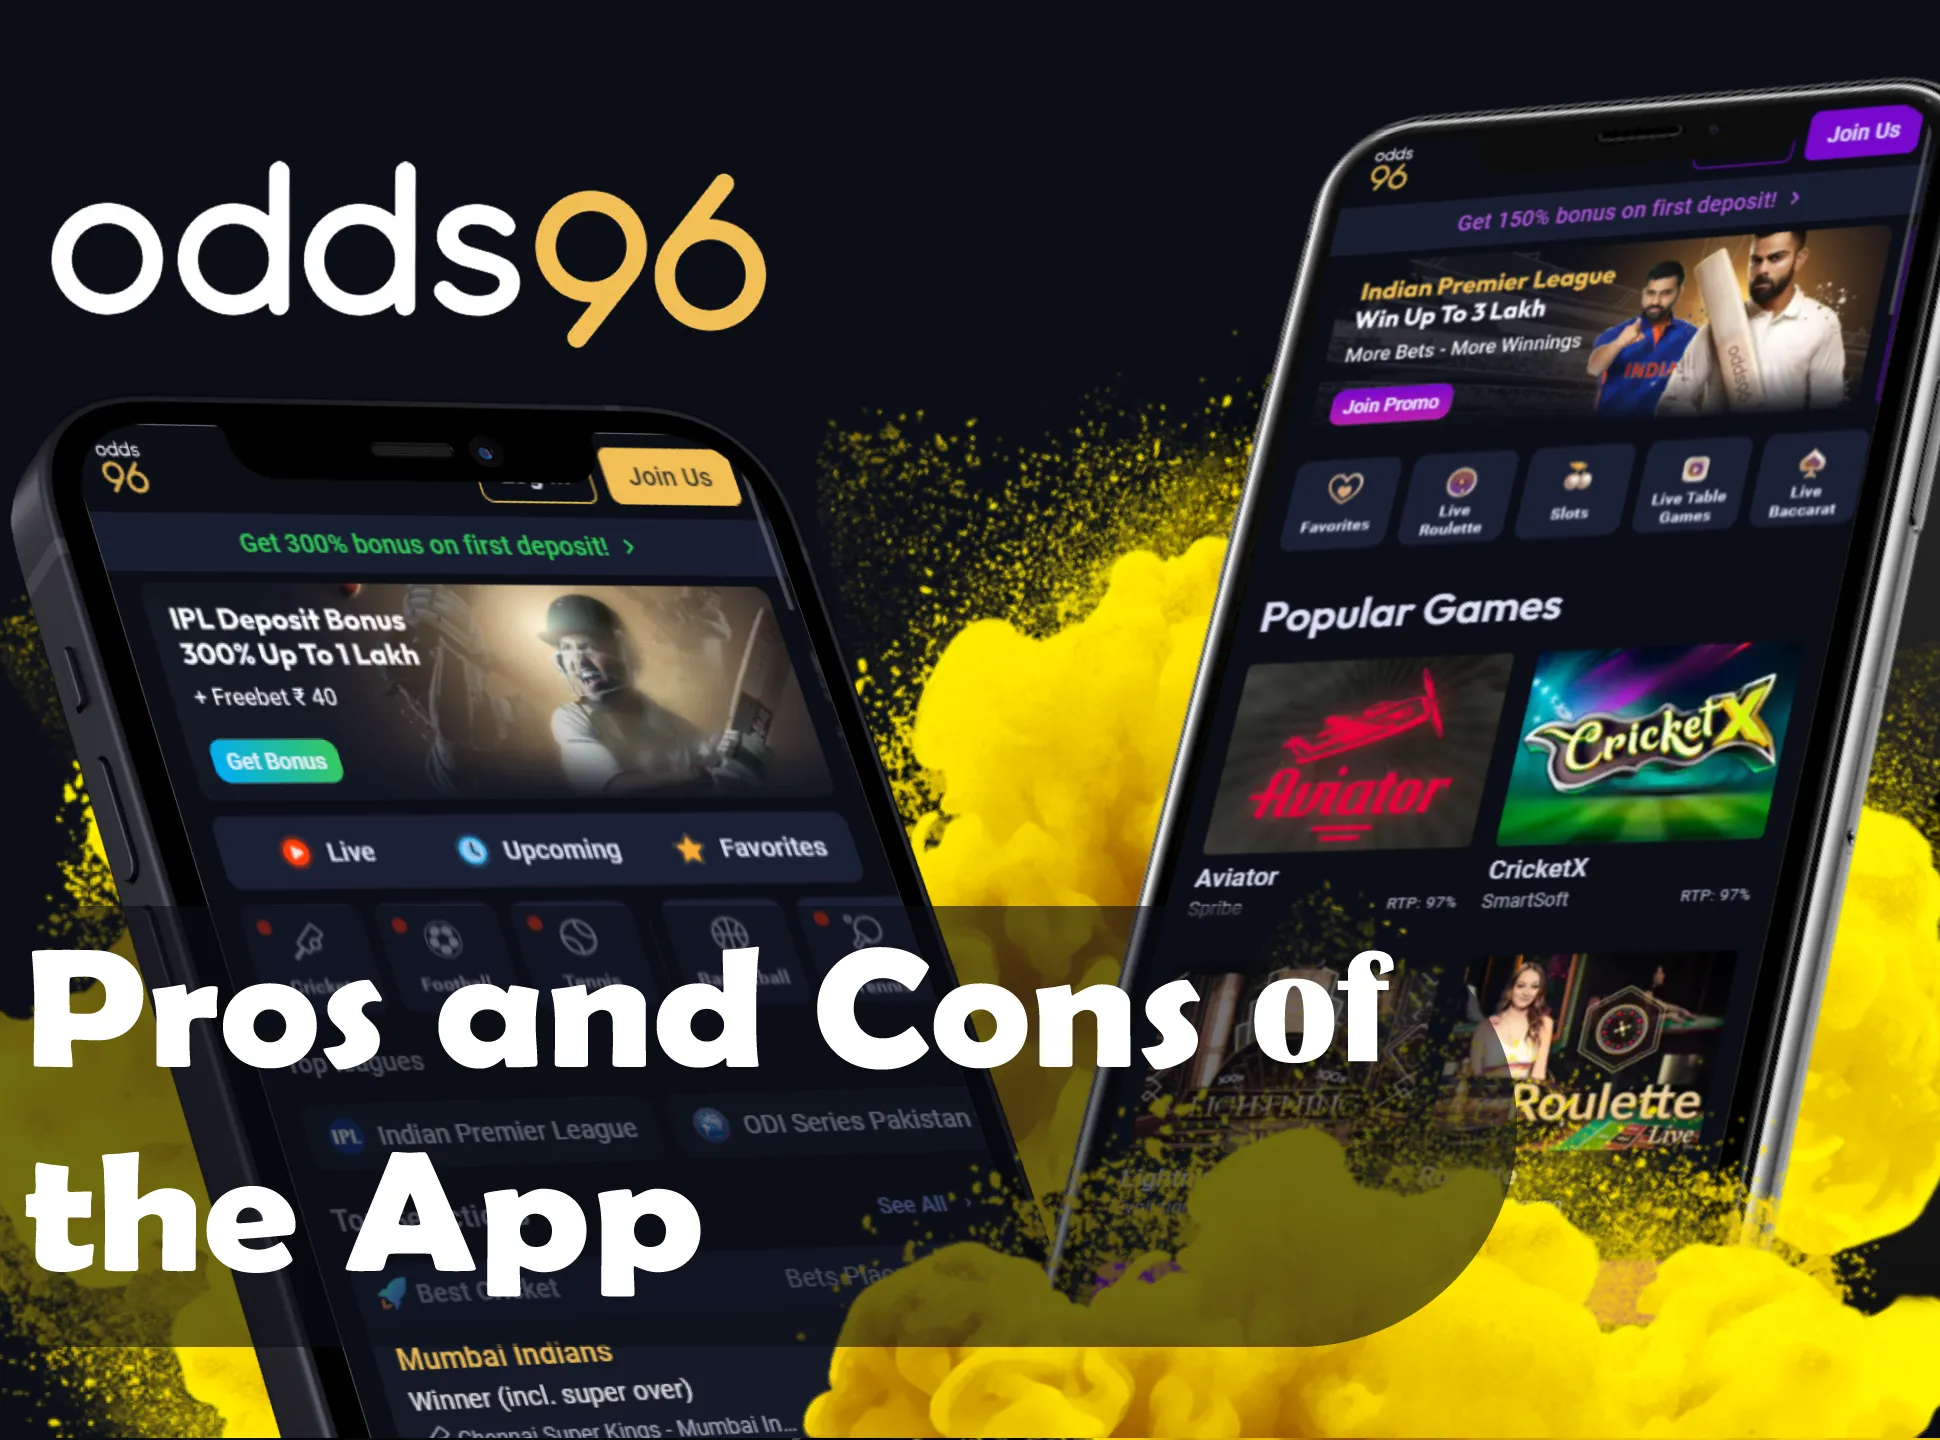 Learn more about pros and cons of Odds96 app.